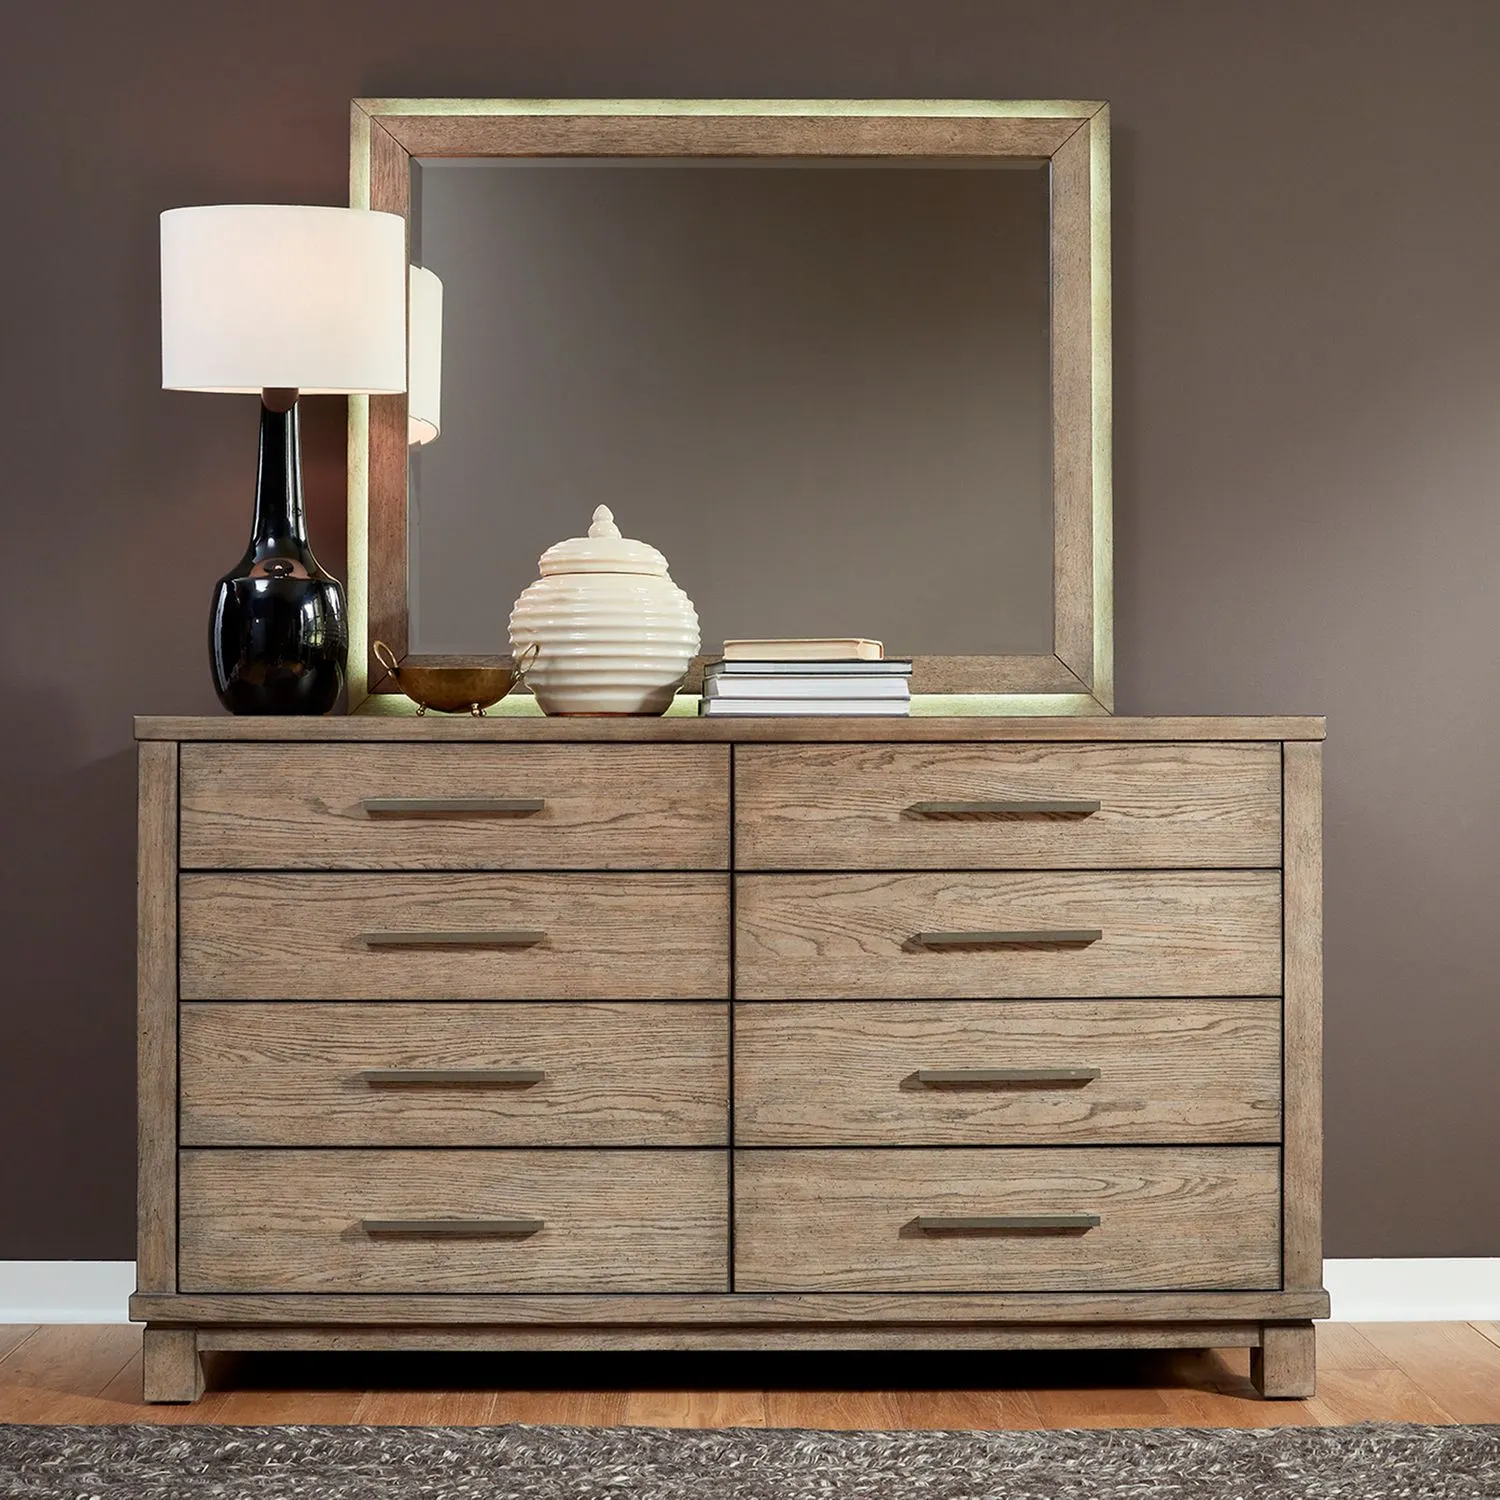 QUEEN STORAGE BED DRESSER MIRROR CHEST AND NIGHTSTAND - CANYON ROAD